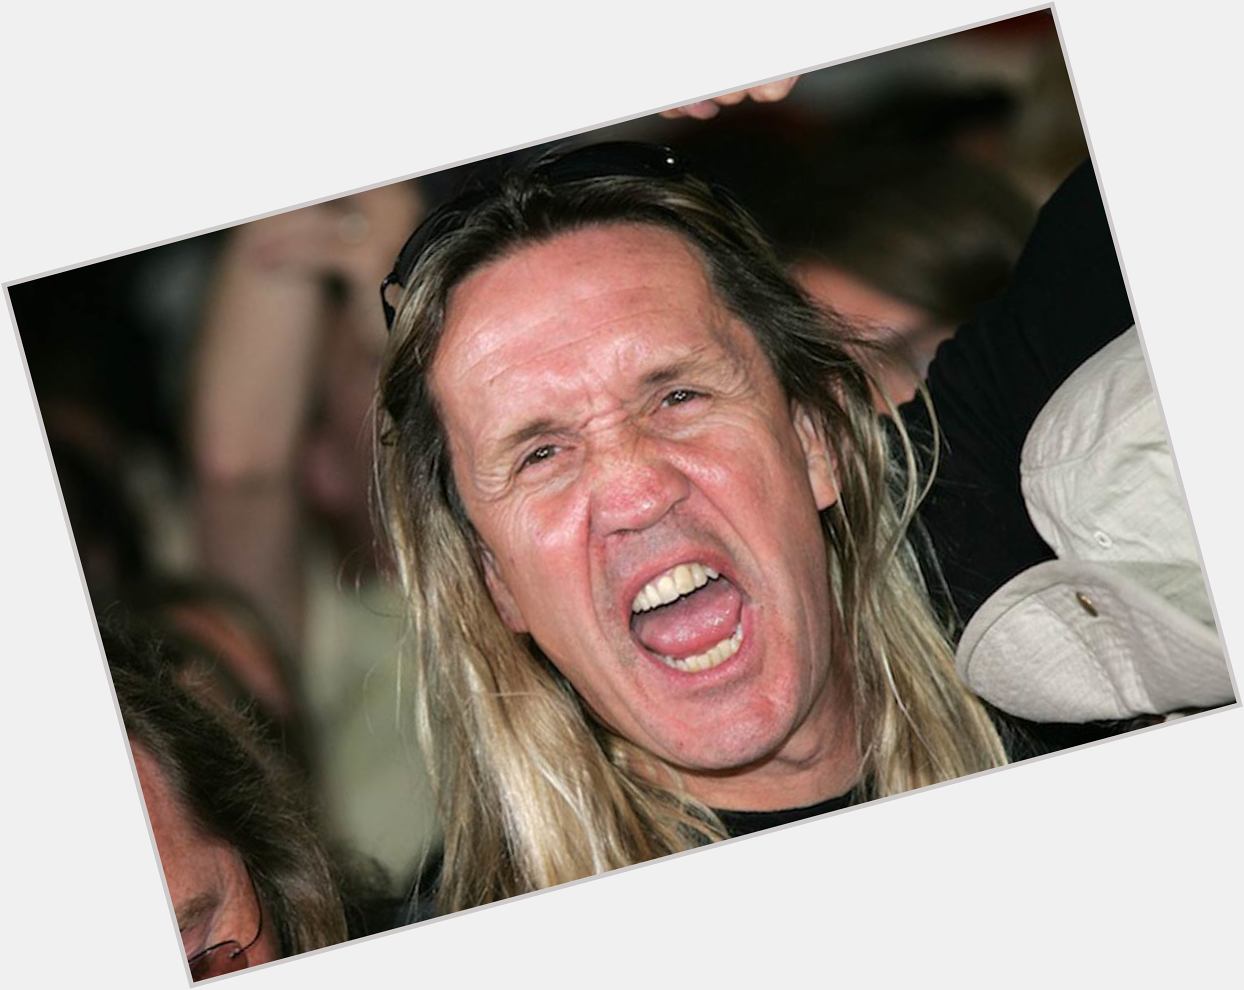 Happy birthday to Nicko McBrain! 10 of his best songs:  